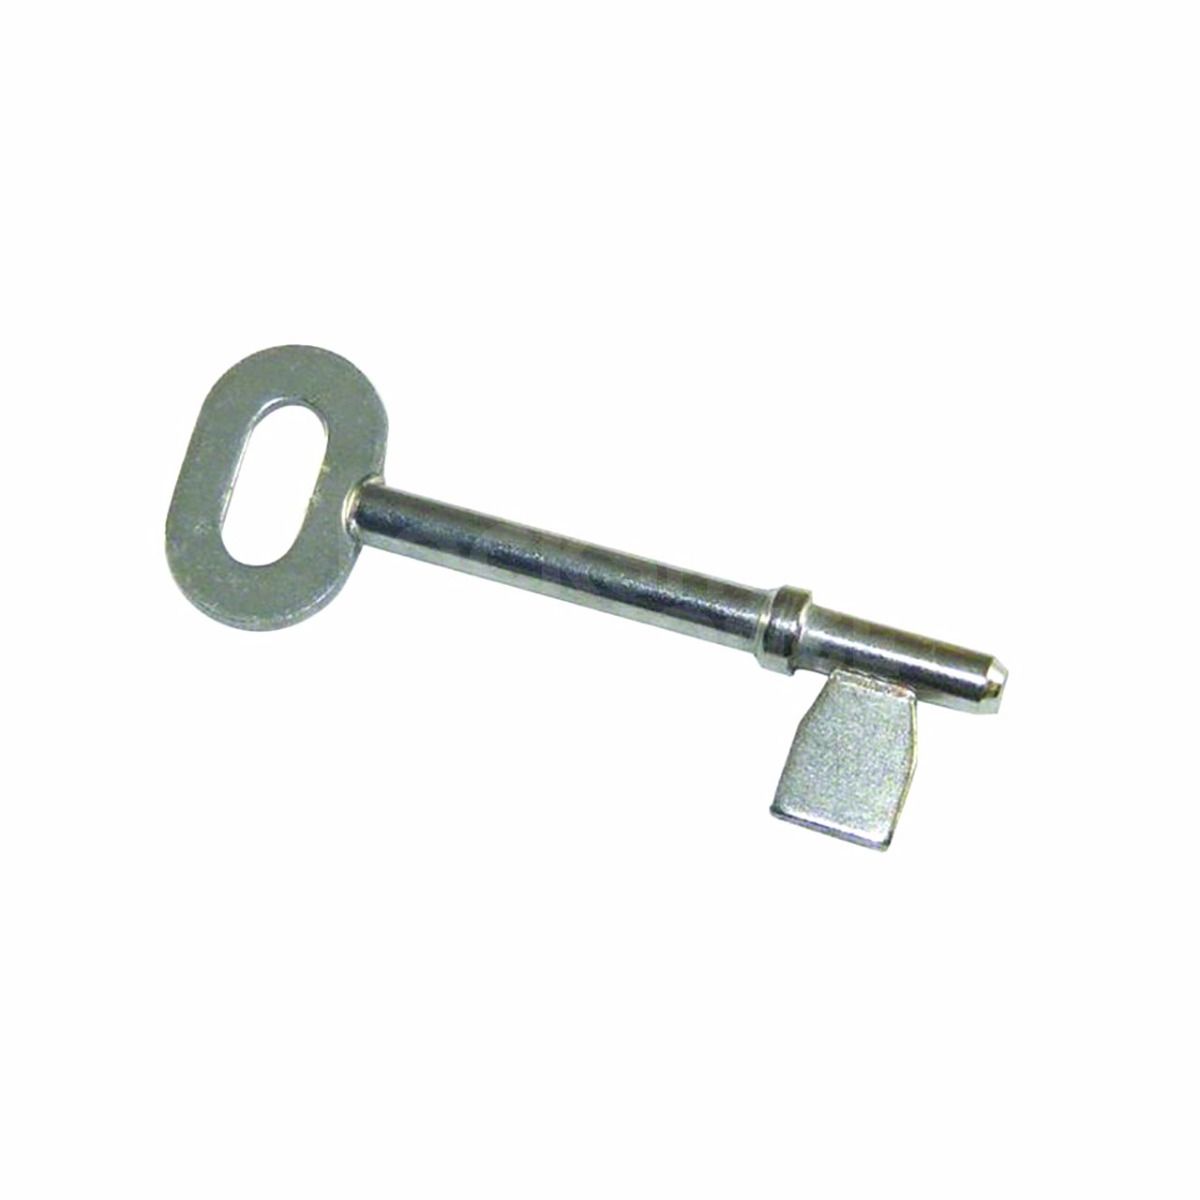 Extra Legge Key for 3 Lever Mortice